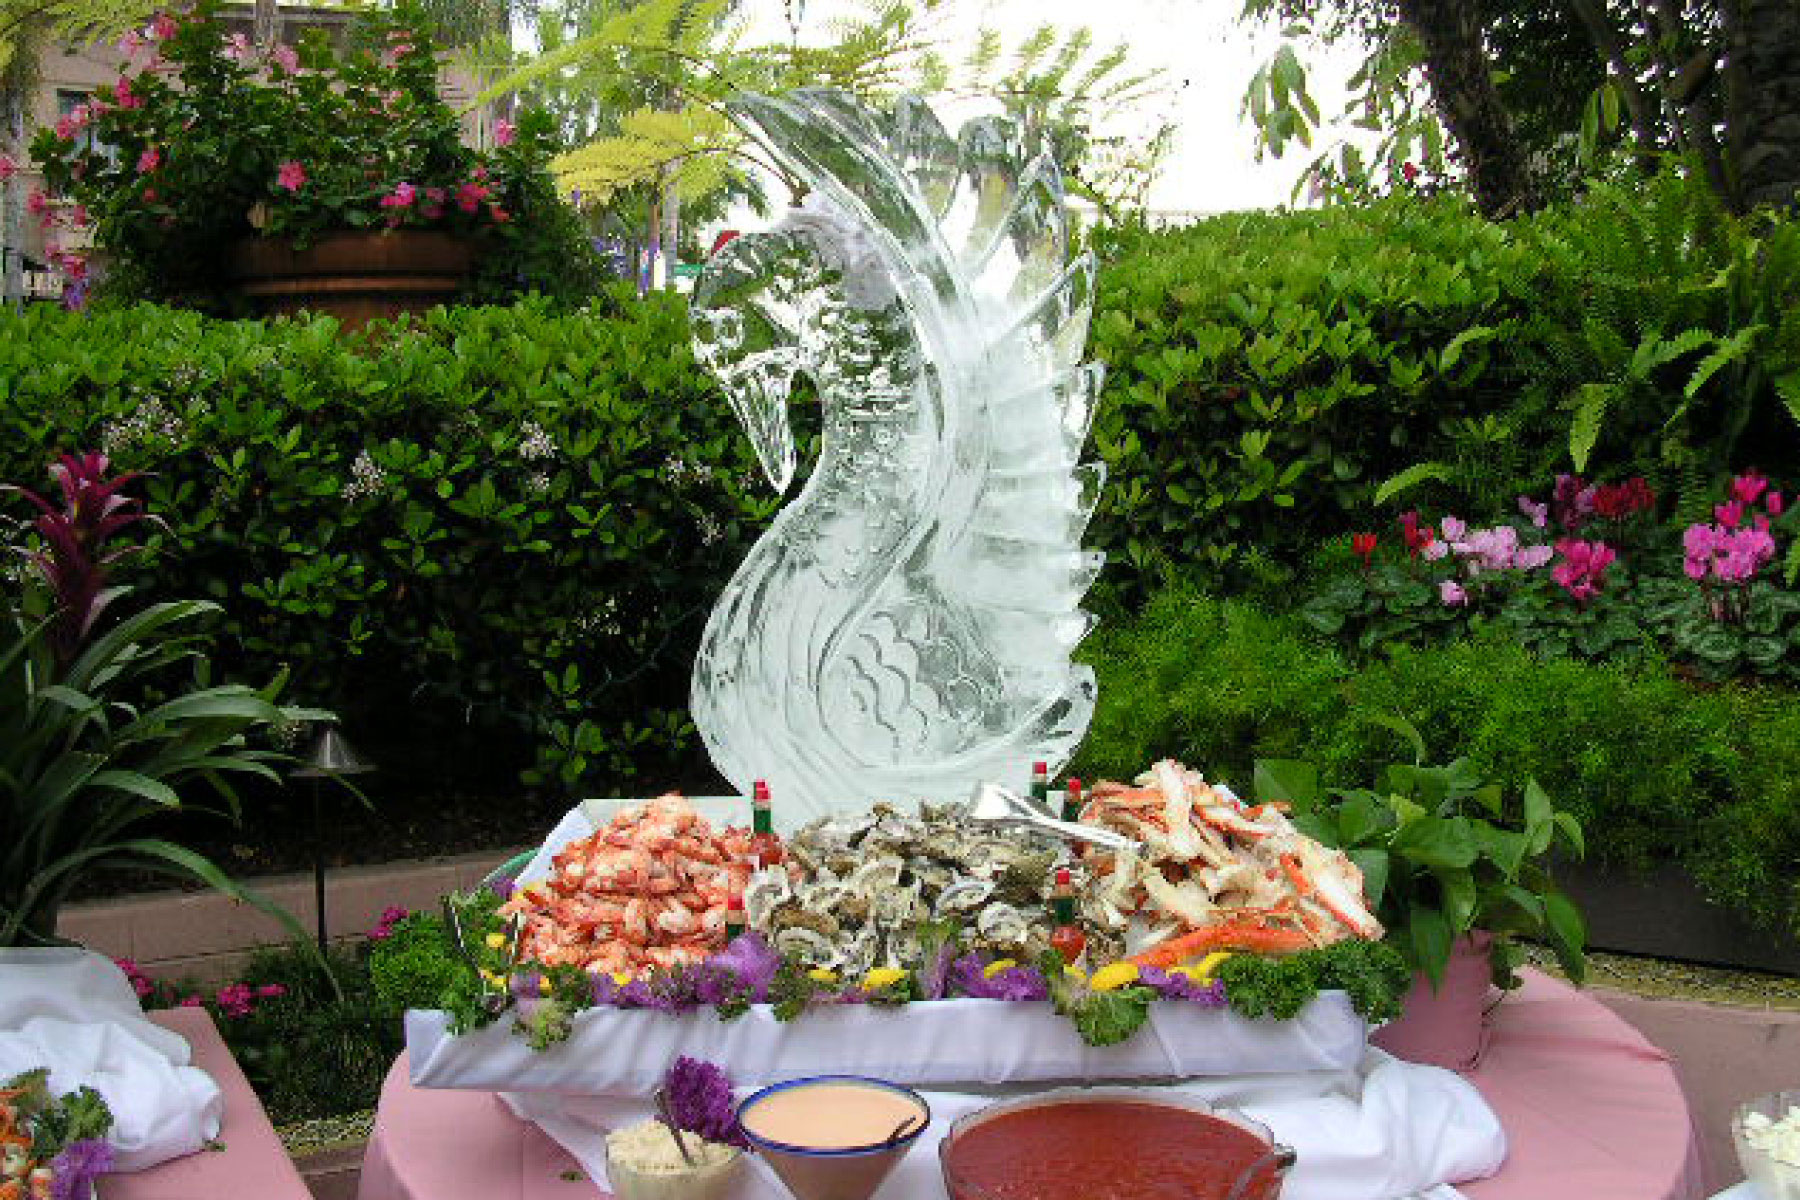 Swan carved in ice for wedding ceremony